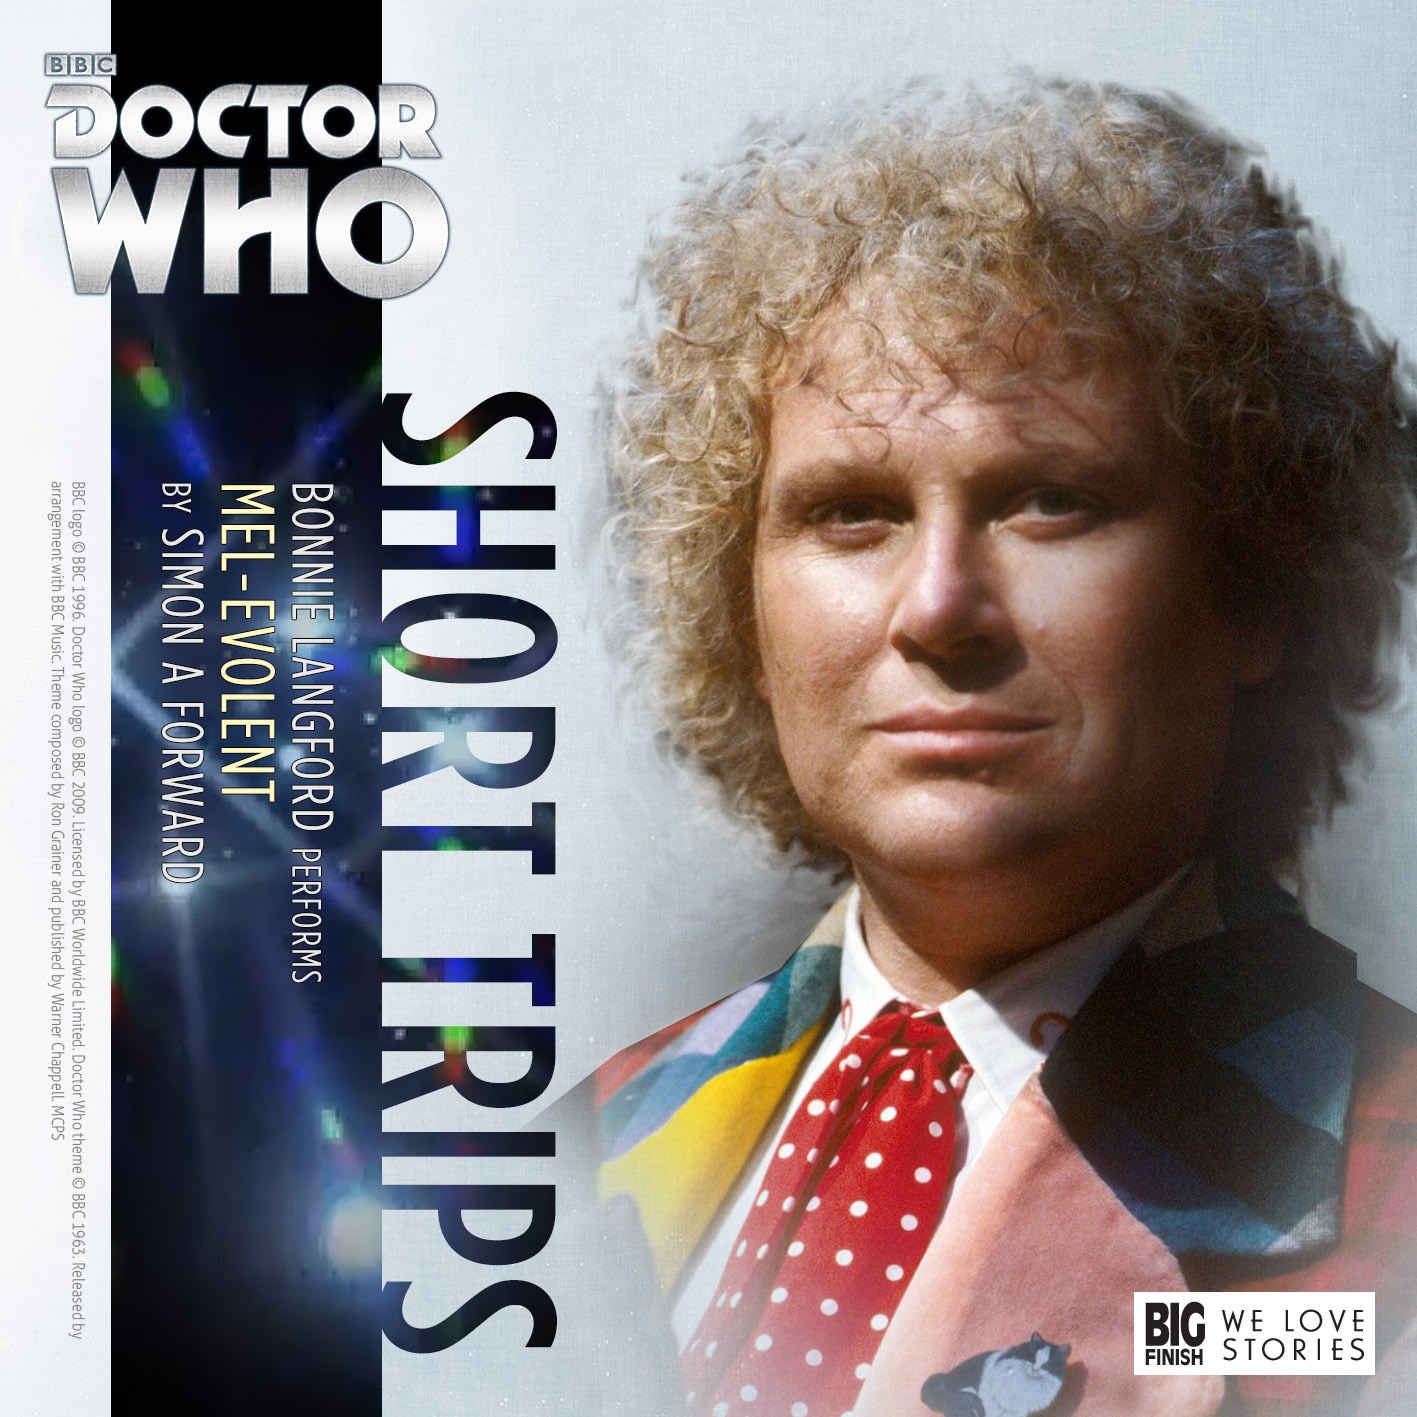 Image of The Sixth Doctor